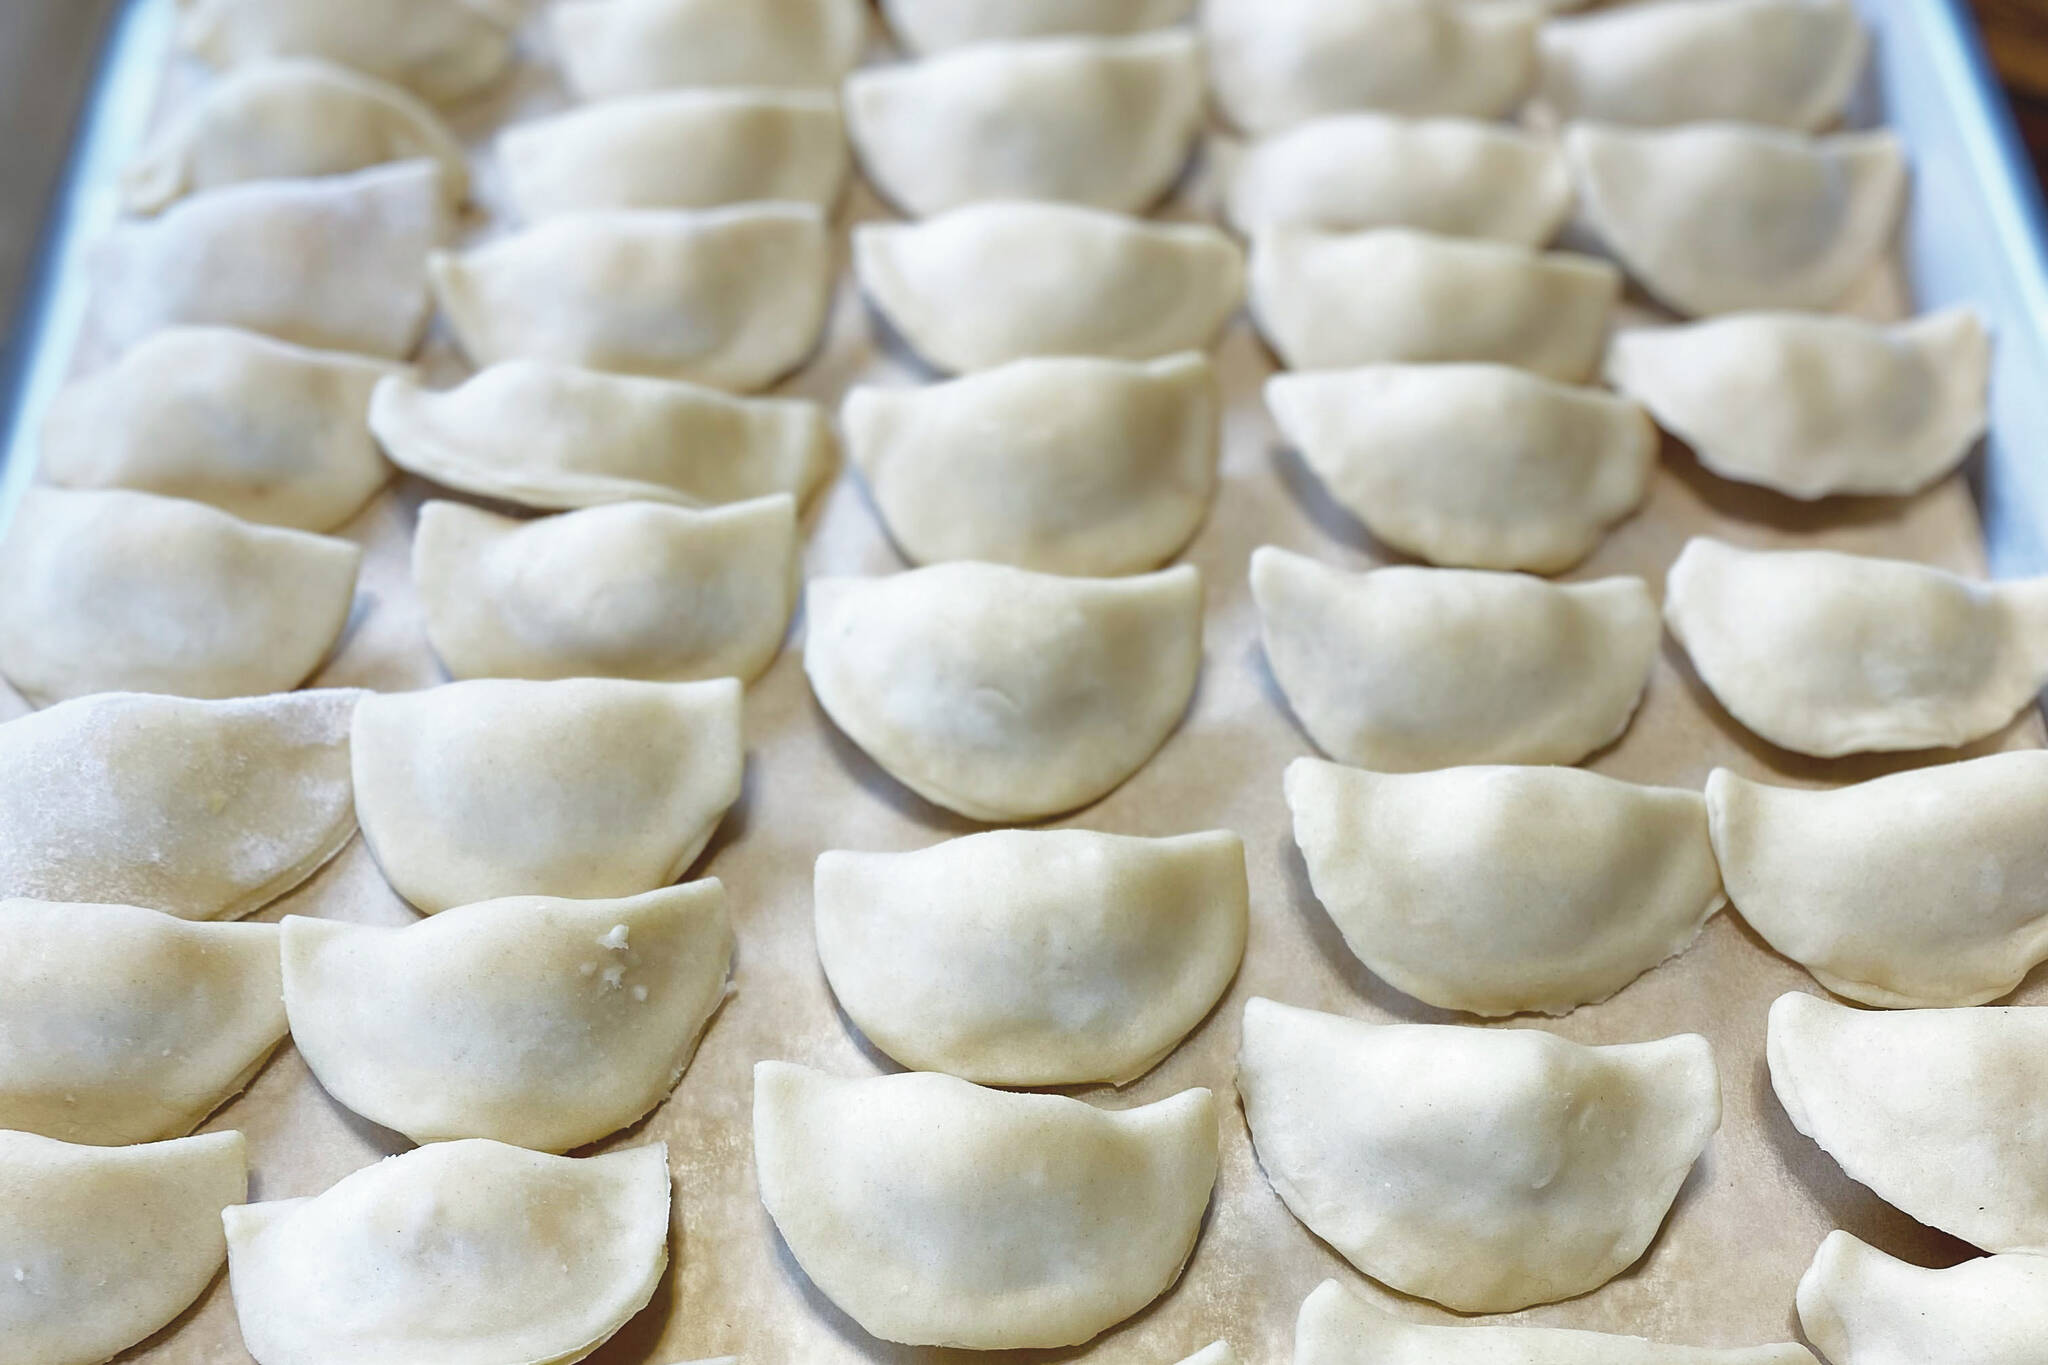 These labor-intensive pierogies can be made in large batches and frozen for future meals. (Photo by Tressa Dale/Peninsula Clarion)